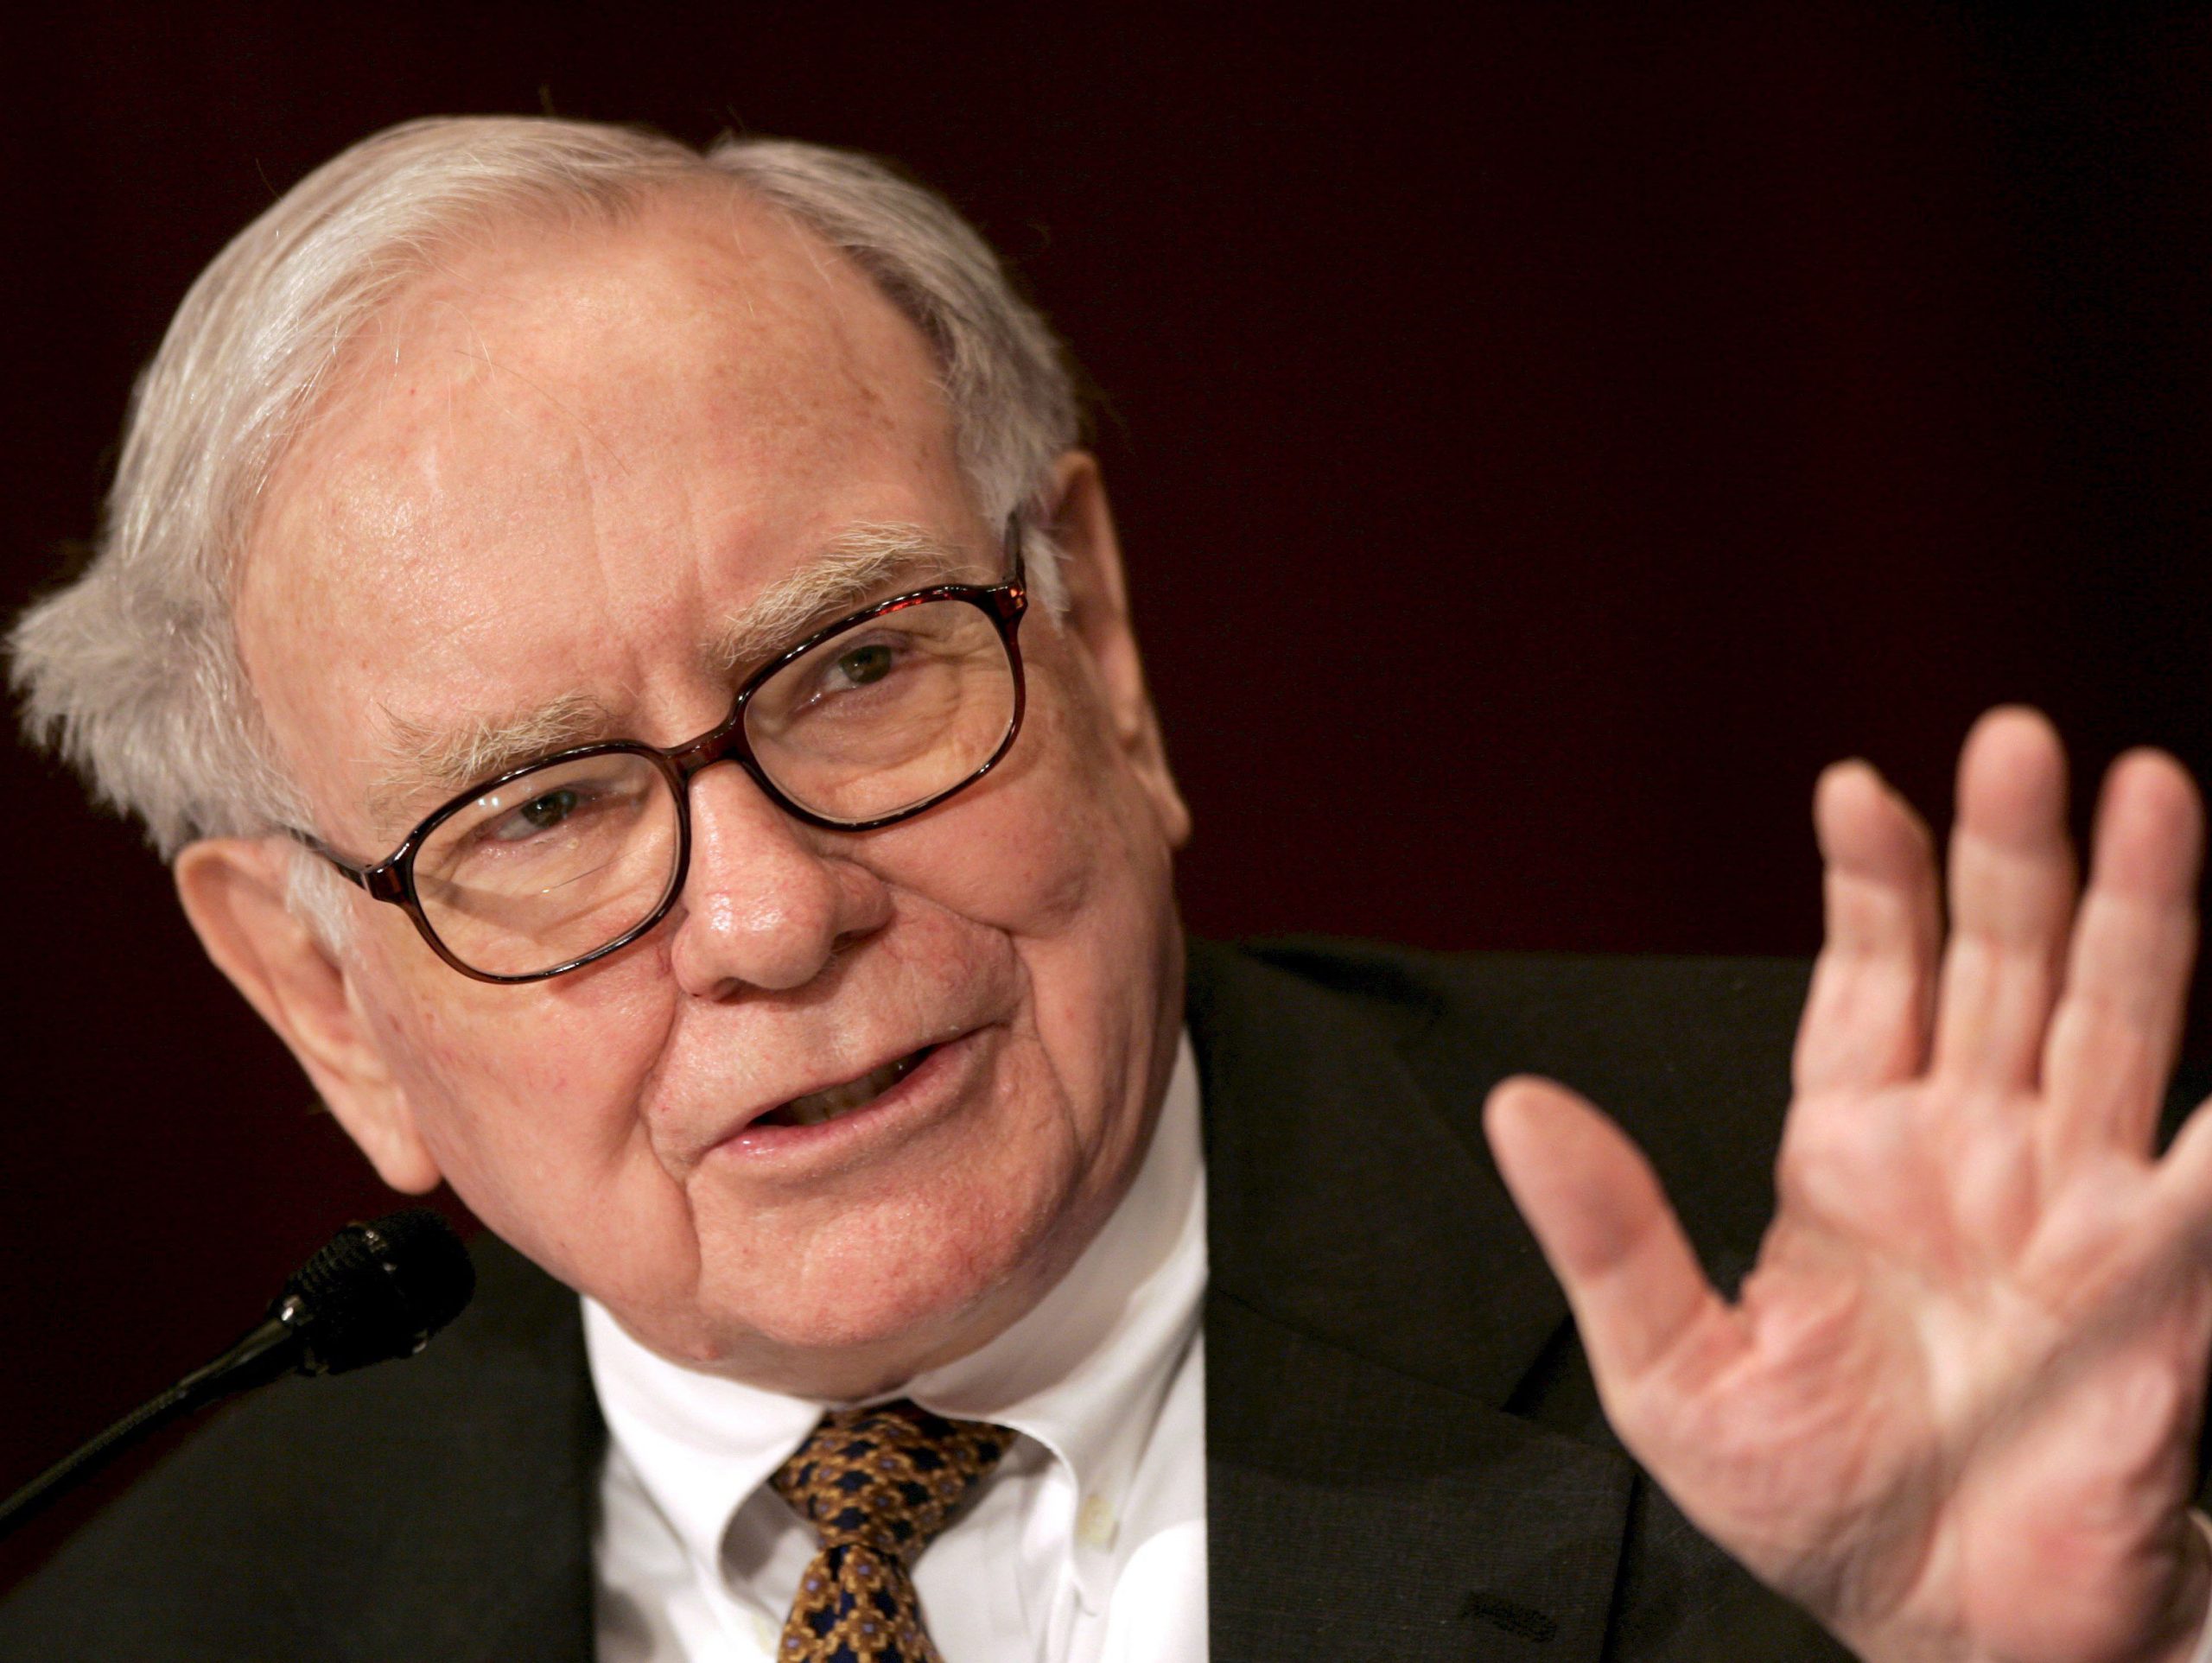 Warren Buffet talking about Strategy and Execution